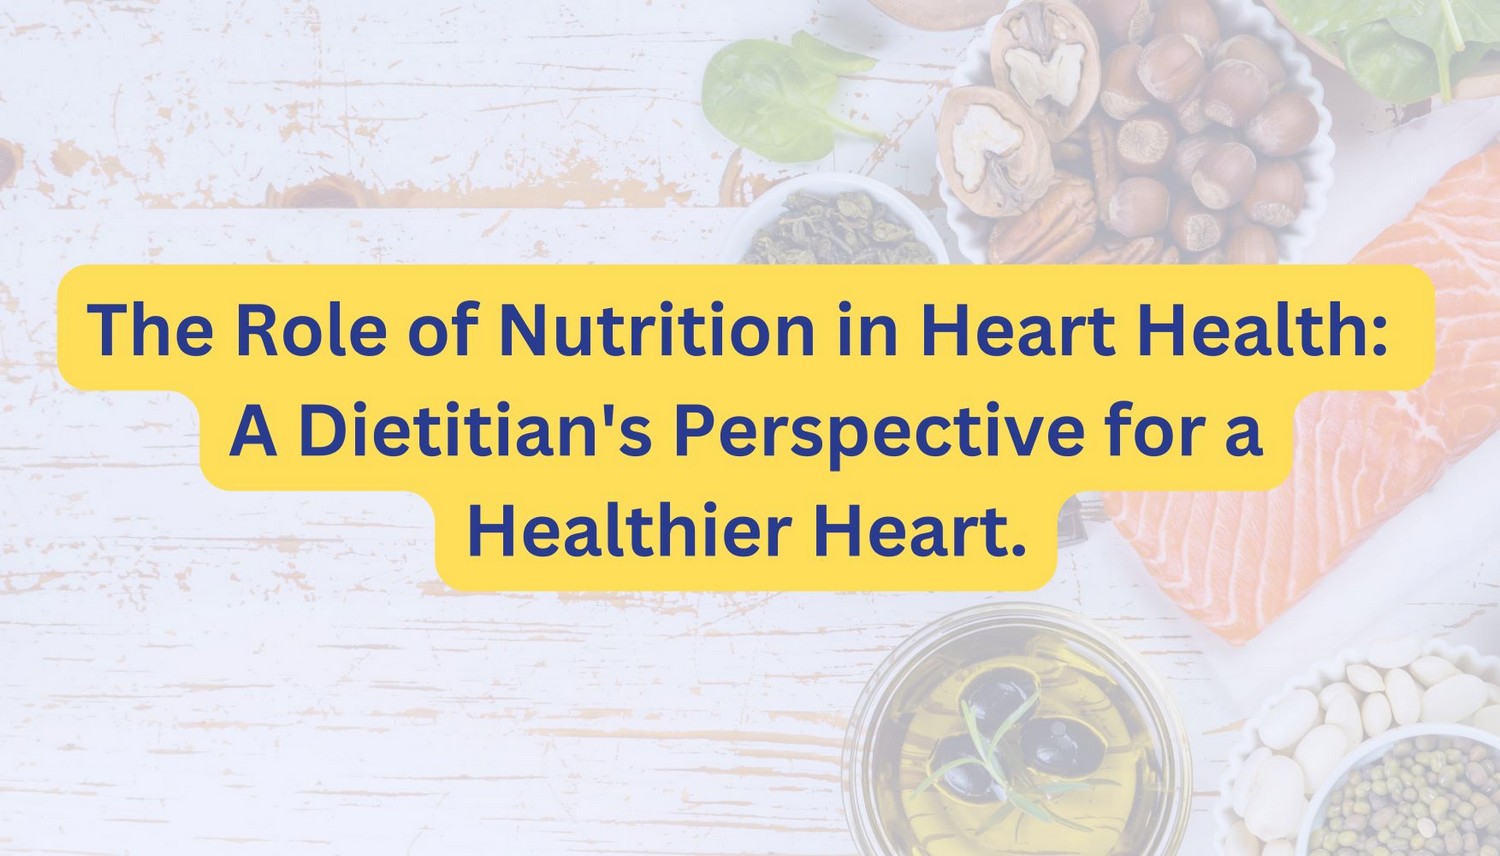 The Role of Nutrition in Heart Health